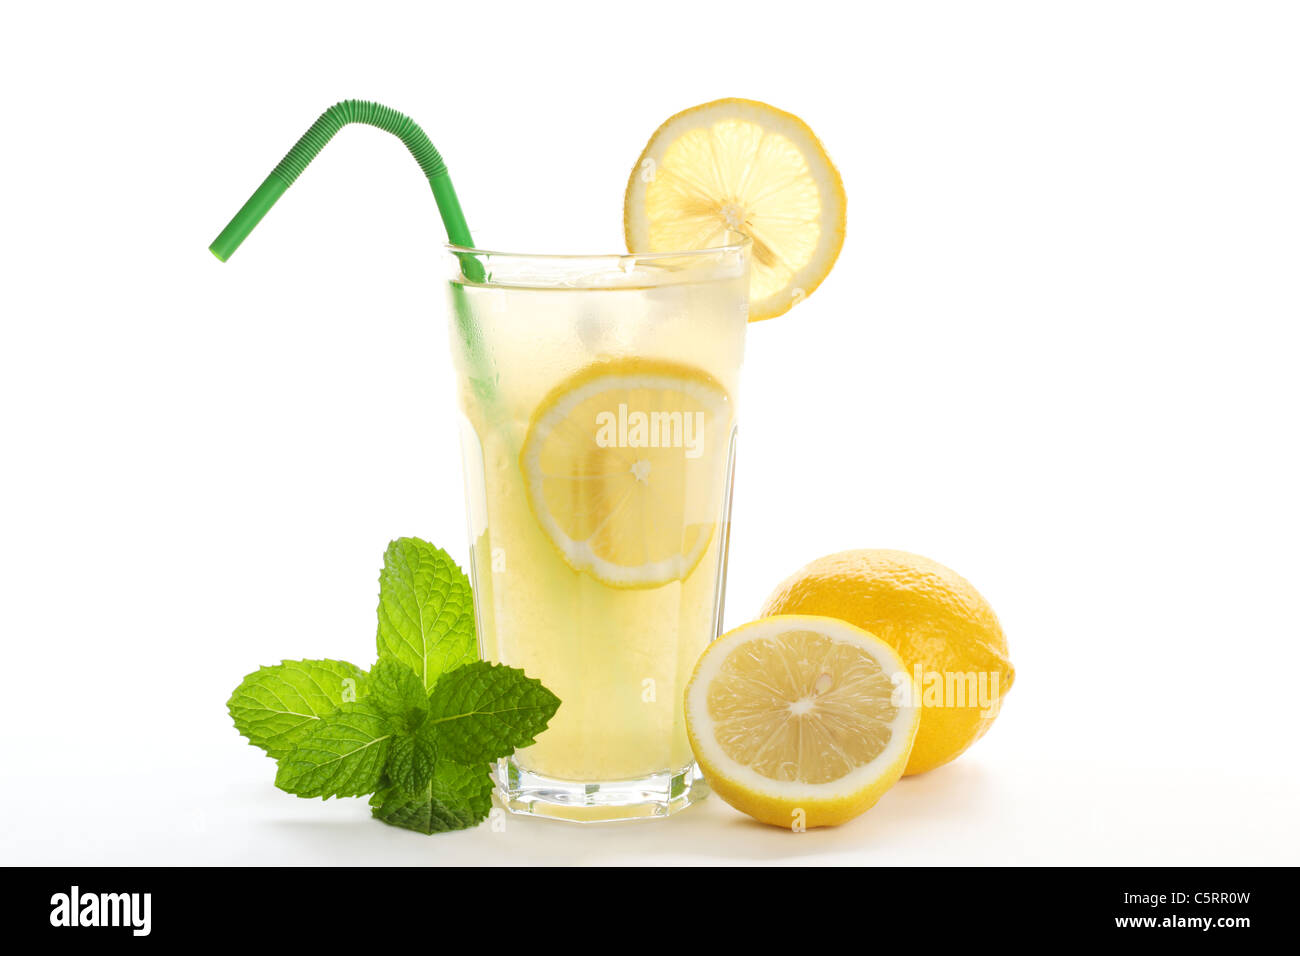 Iced drink with mint and citrus fruit. Stock Photo